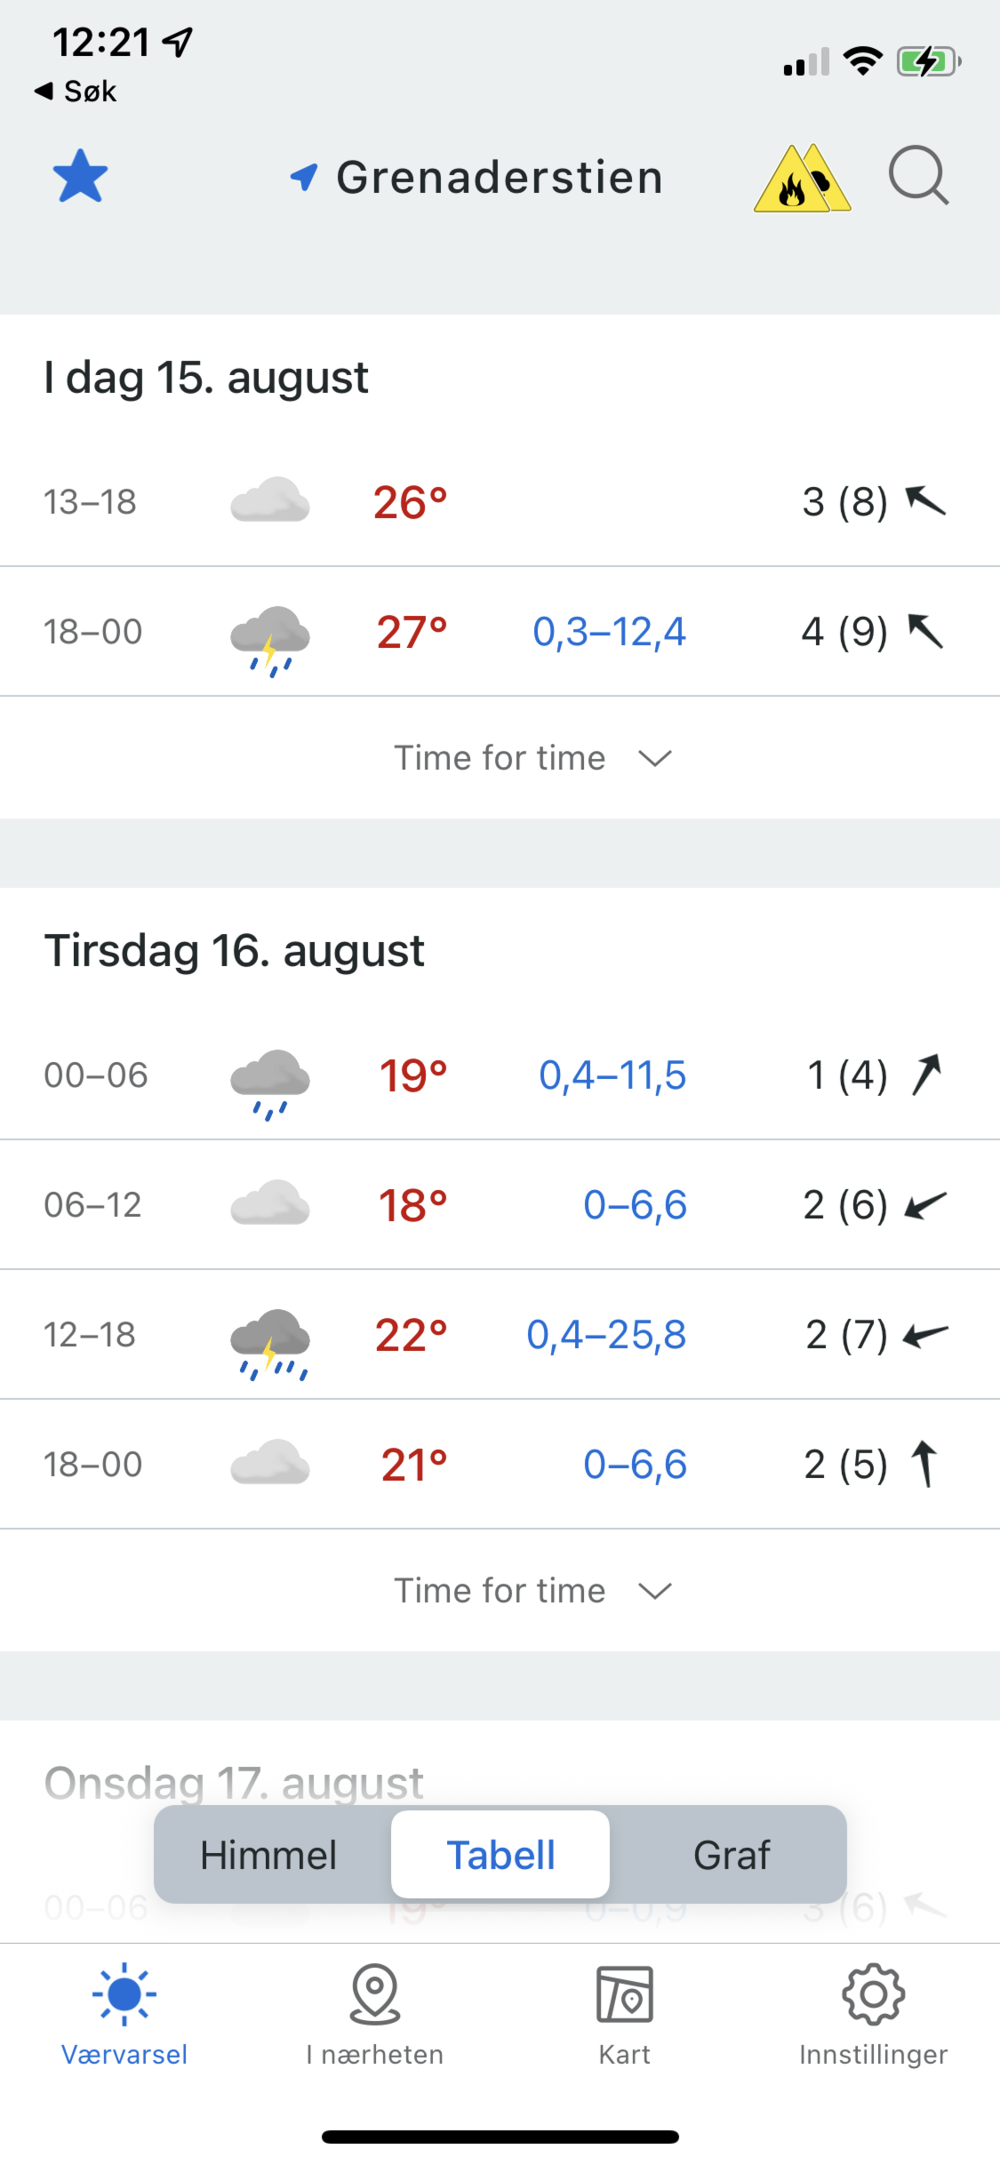 Weather forecast predicting thunderstorm in Oslo, Norway tonight.